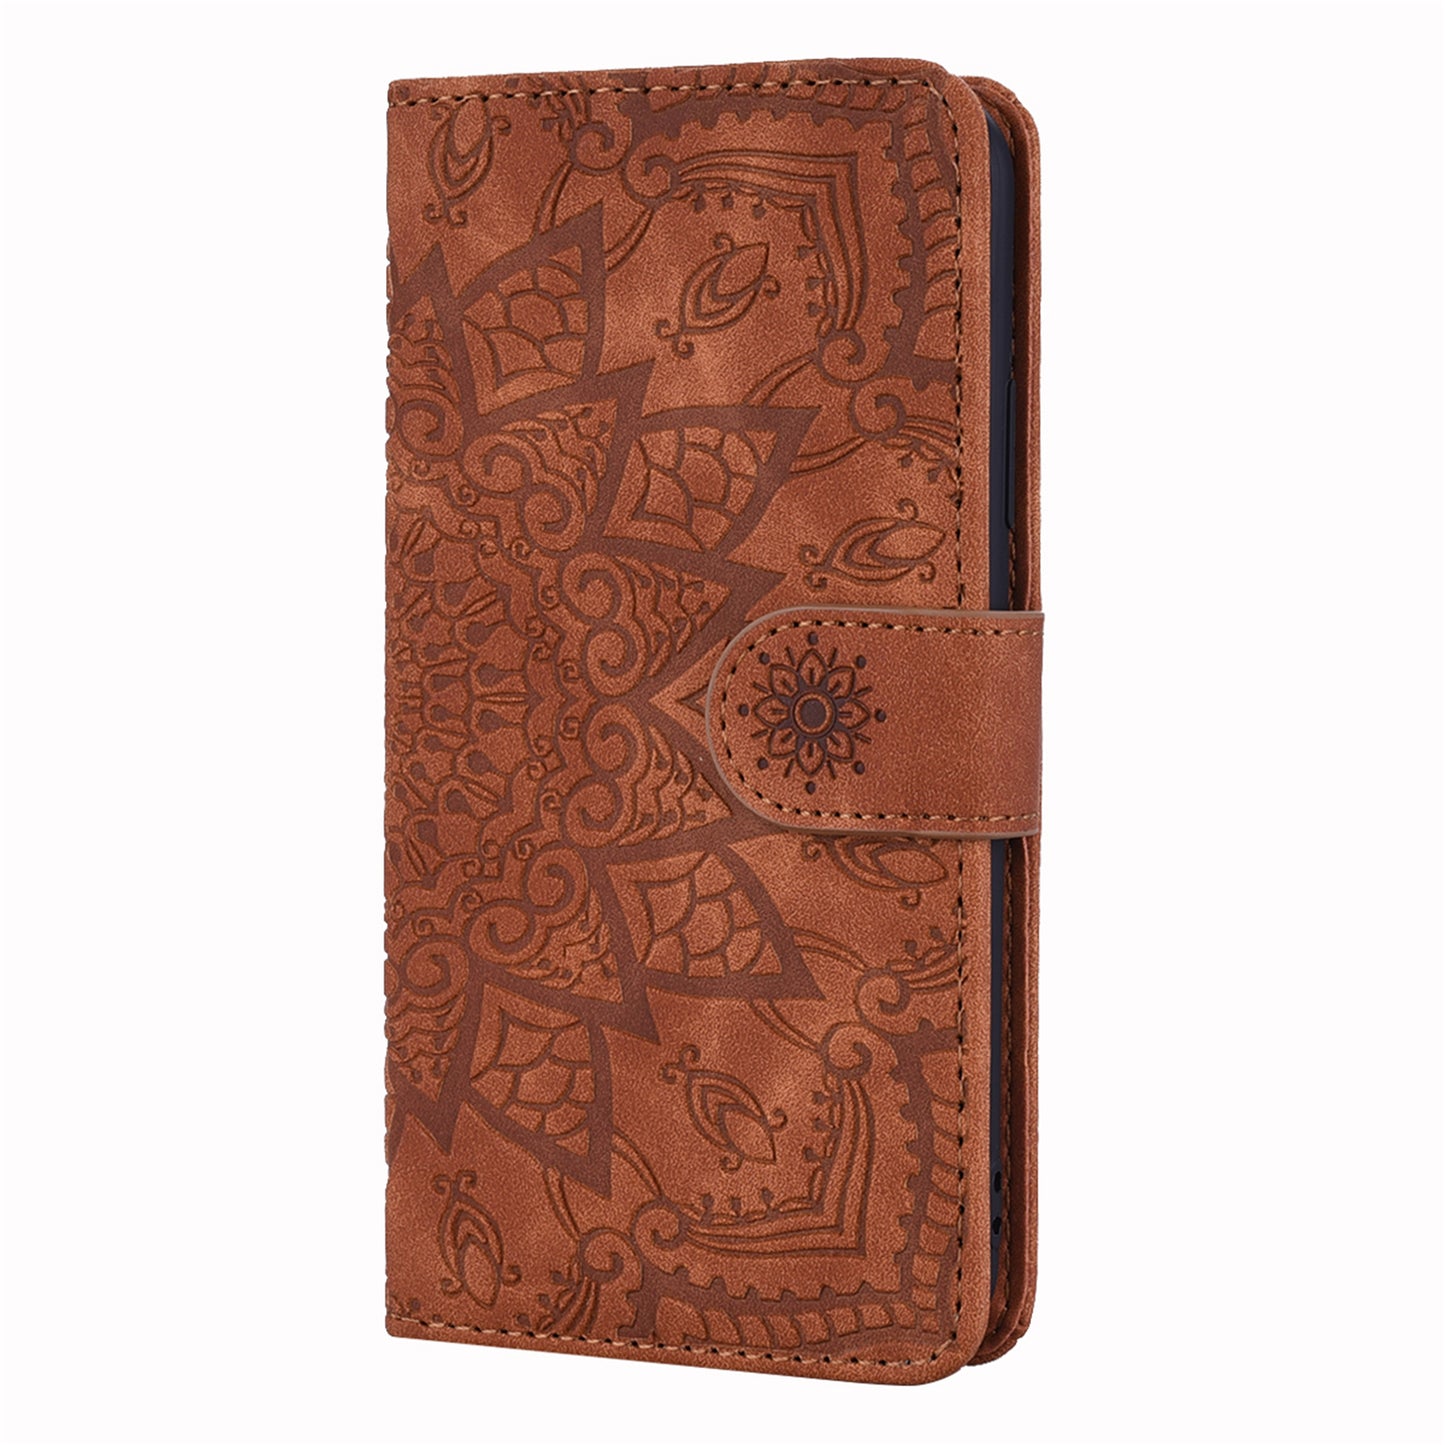 Double Hem Galaxy A21s Leather Case Embossing Sunflower Wallet Foldable Stand